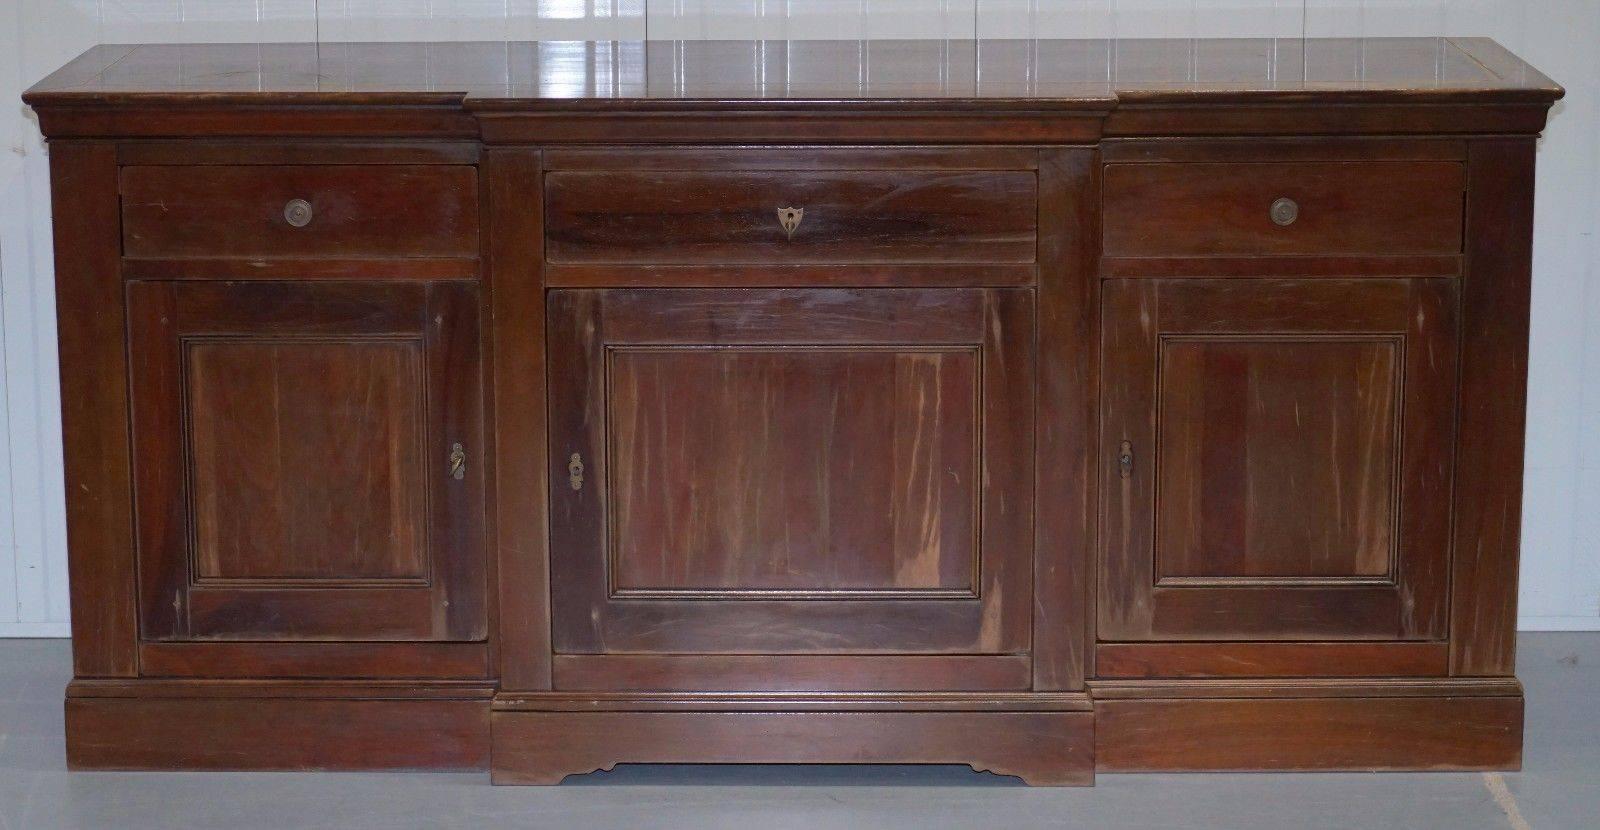 We are delighted to offer for sale this large distressed Grange France breakfront solid cherrywood sideboard RRP £3999

A large and substantial piece, as you can see its heavily distressed, personally I think it looks amazing but if you’re looking